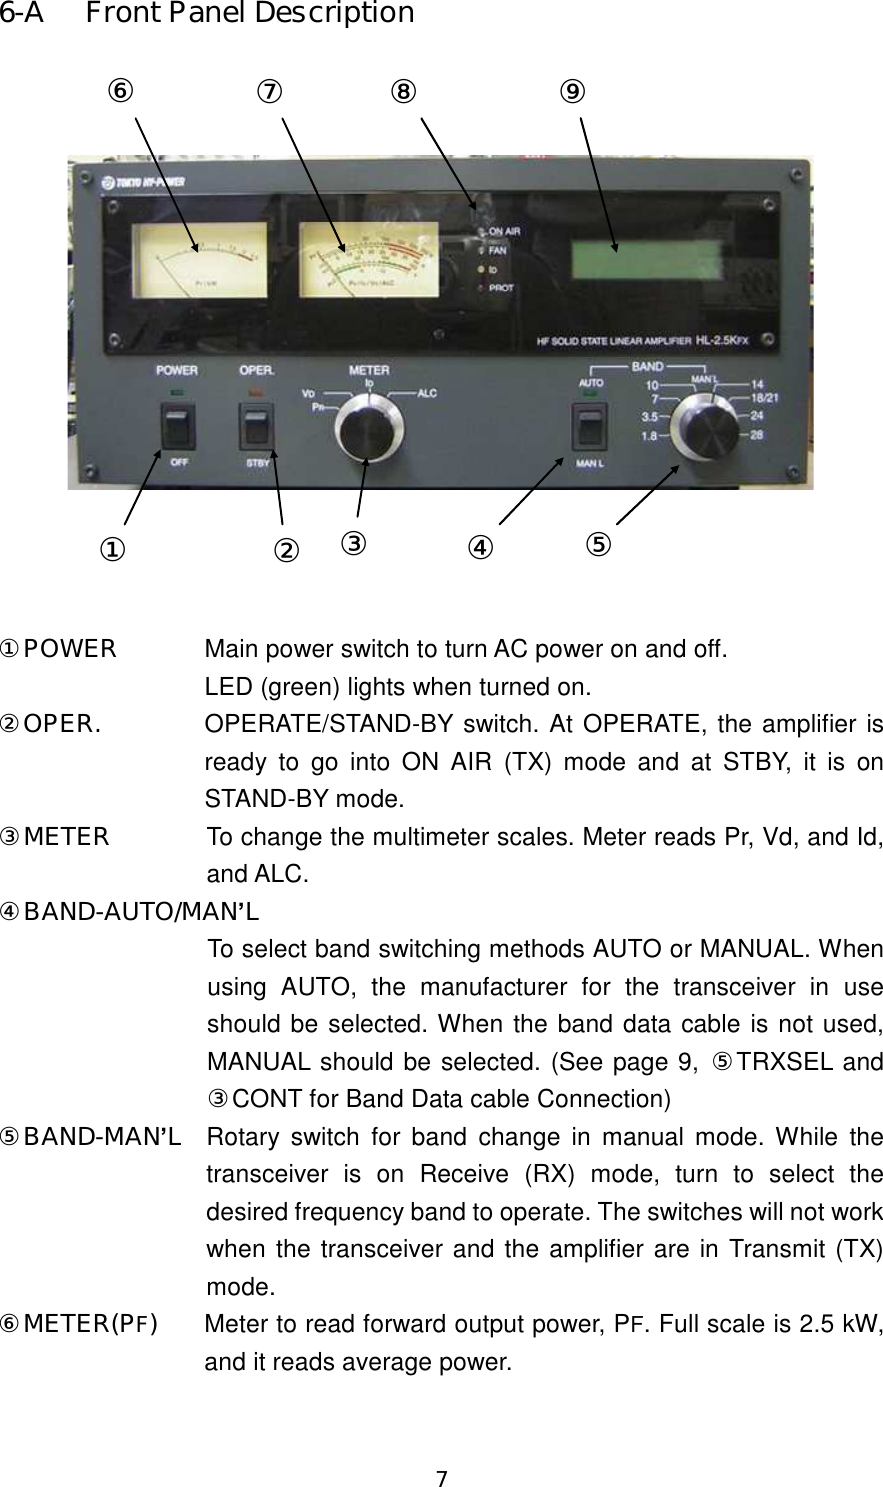 7 6-A  Front Panel Description                 ①POWER  Main power switch to turn AC power on and off.   LED (green) lights when turned on. ②OPER.  OPERATE/STAND-BY switch. At OPERATE, the amplifier is ready  to  go  into  ON  AIR  (TX)  mode  and  at  STBY,  it  is  on STAND-BY mode. ③METER  To change the multimeter scales. Meter reads Pr, Vd, and Id, and ALC. ④BAND-AUTO/MAN’L  To select band switching methods AUTO or MANUAL. When using  AUTO,  the manufacturer for the  transceiver  in  use should be selected. When the band data cable is not used, MANUAL should be selected. (See page 9,  ⑤TRXSEL and ③CONT for Band Data cable Connection) ⑤BAND-MAN’L  Rotary  switch  for  band  change  in  manual  mode.  While  the transceiver  is  on  Receive  (RX)  mode,  turn  to  select  the desired frequency band to operate. The switches will not work when the transceiver and the amplifier are in Transmit (TX) mode.   ⑥METER(PF)  Meter to read forward output power, PF. Full scale is 2.5 kW, and it reads average power. ①②③④⑤⑨⑥⑦ ⑧